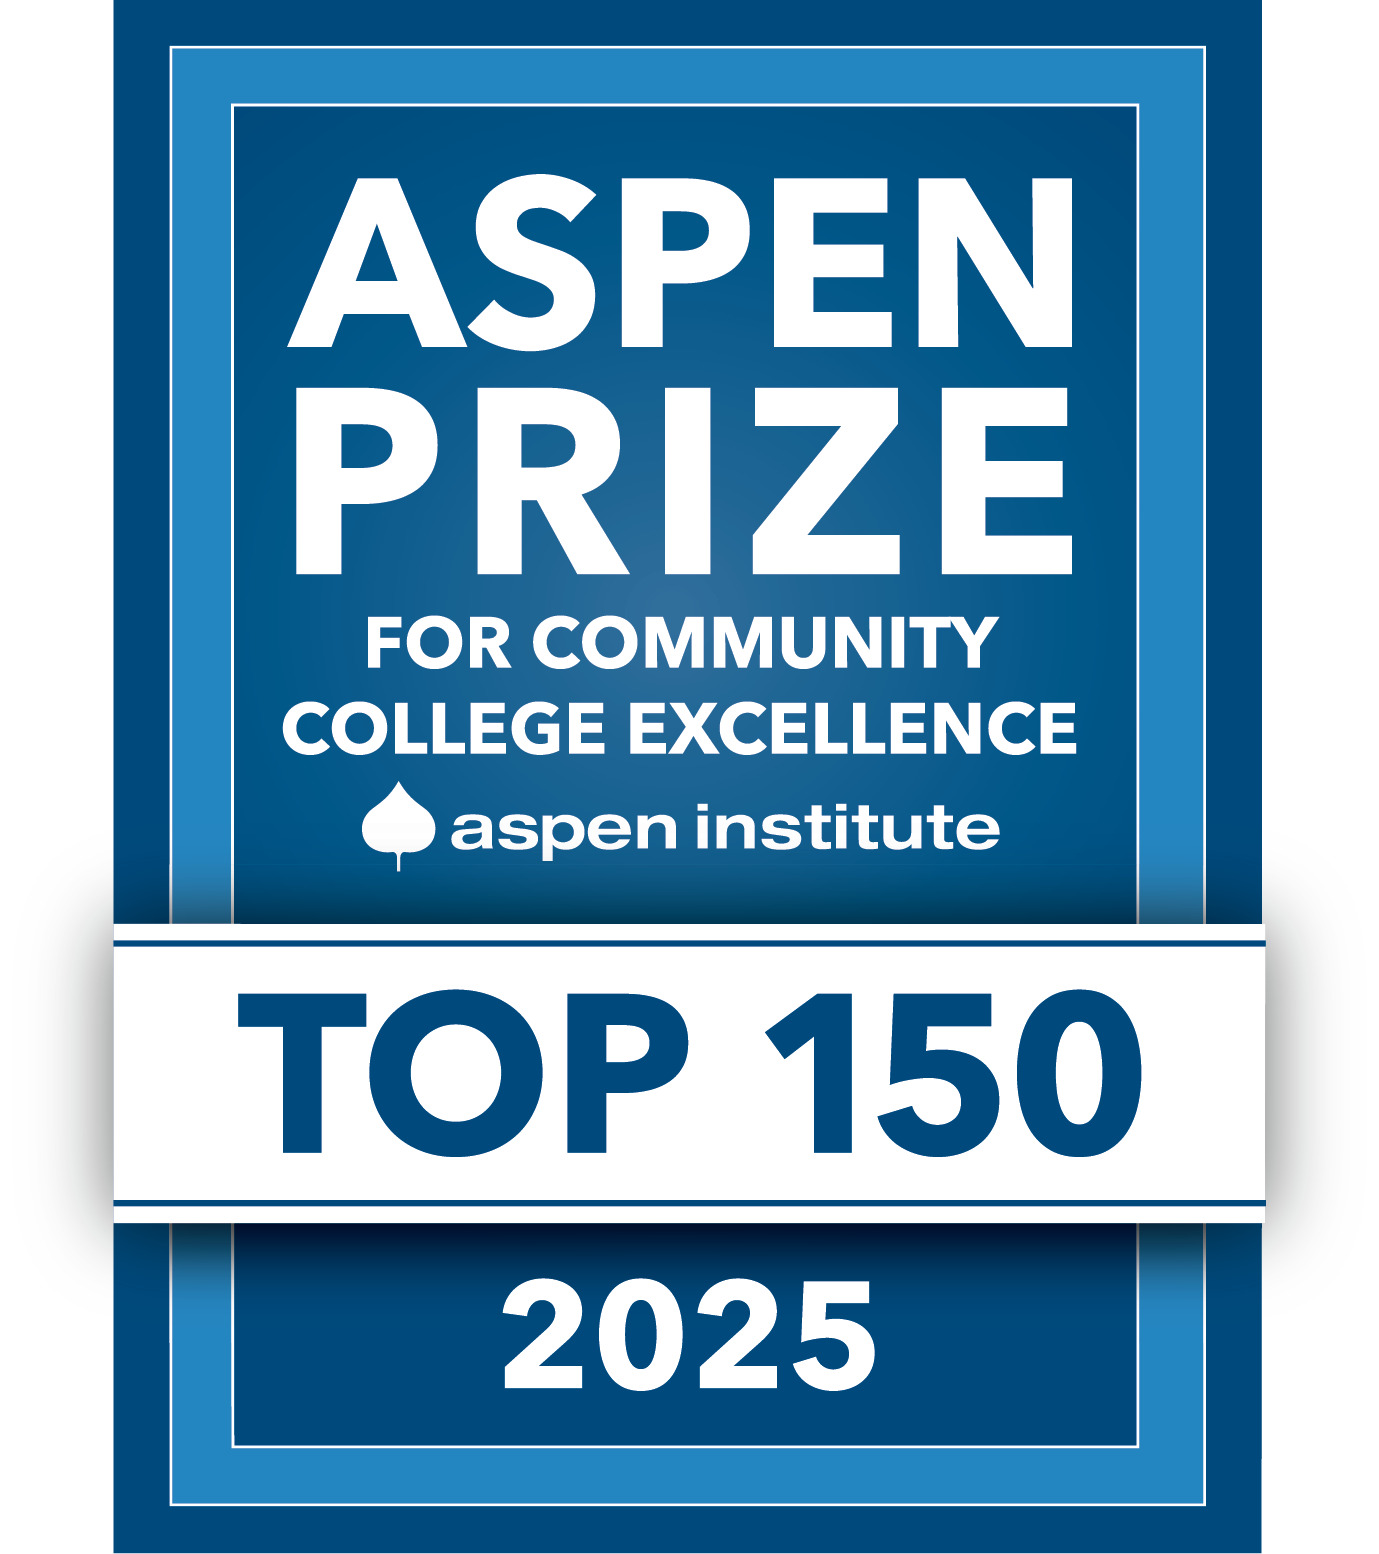 Aspen Prize for Community College Excellence from the Aspen Institute Top 150 in 2025